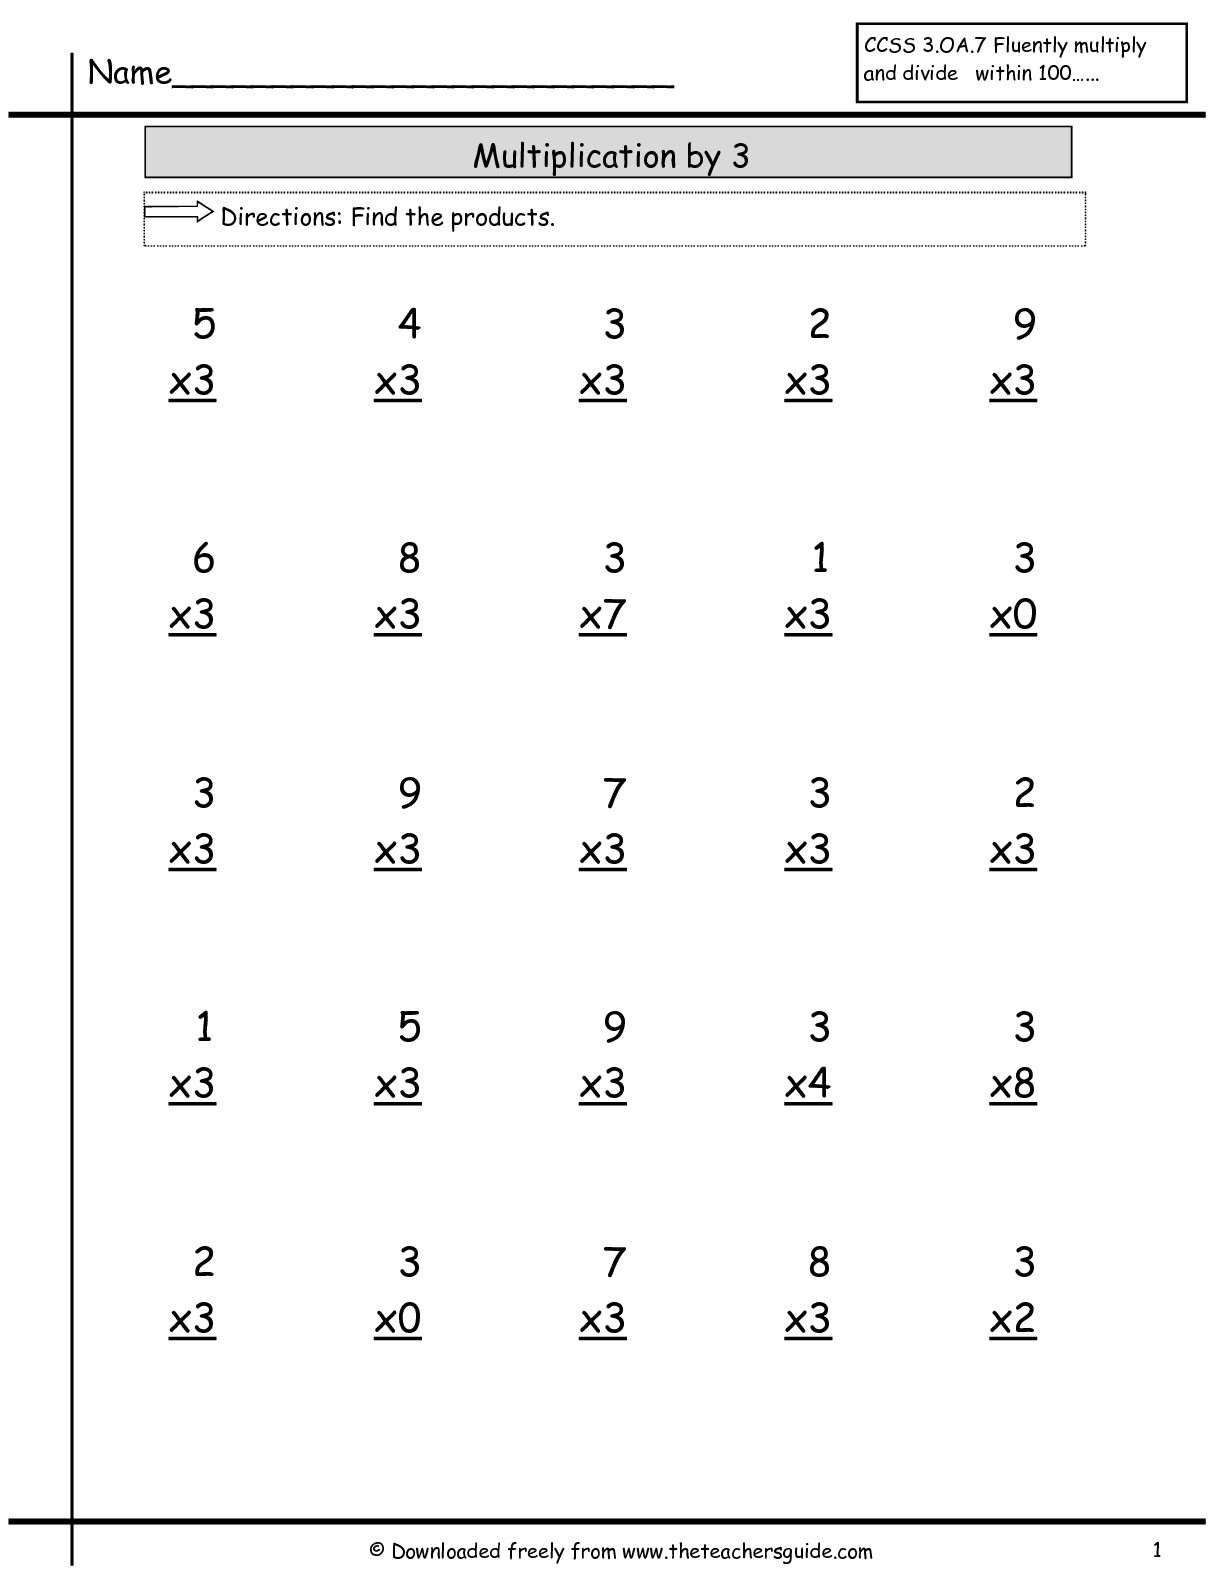 Multiplication Facts Worksheets From The Teacher&amp;#039;s Guide in Printable Multiplication By 3